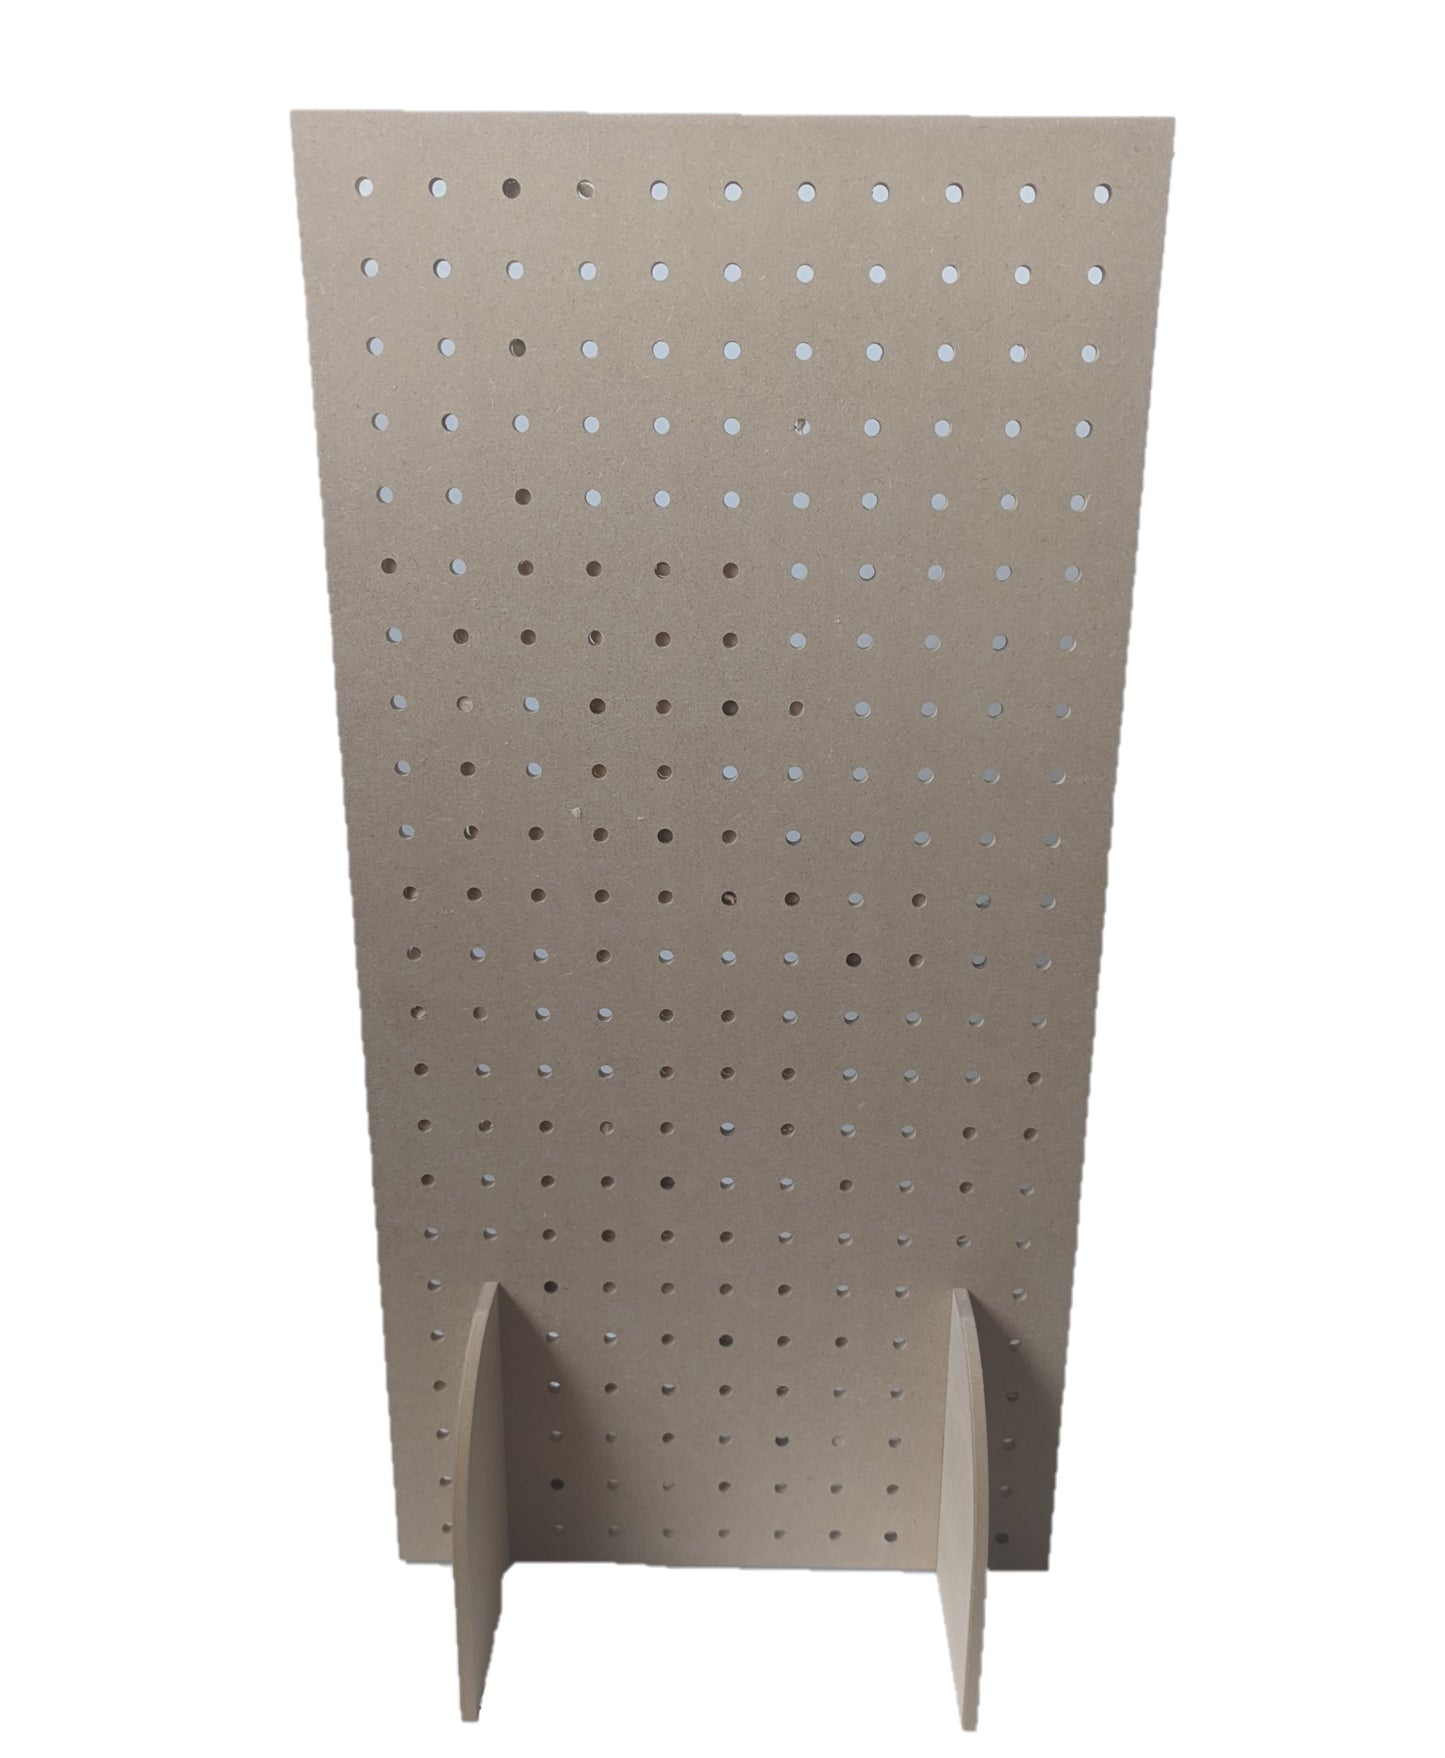 Freestanding pegboards (Two Sizes)